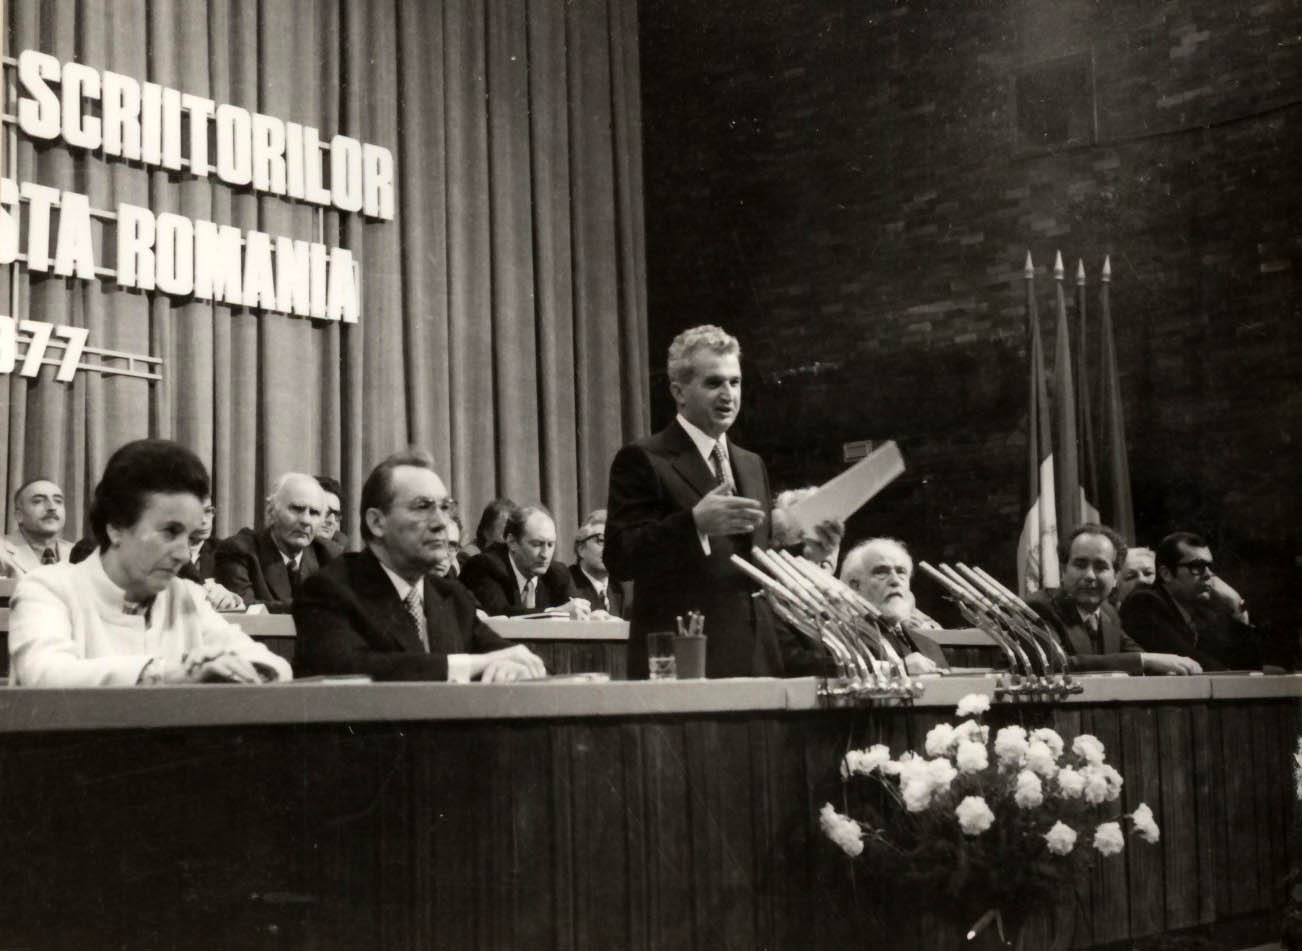 Nicolae Ceaușescu speaking at Writers' National Conference, Bucharest, 26 May 1977